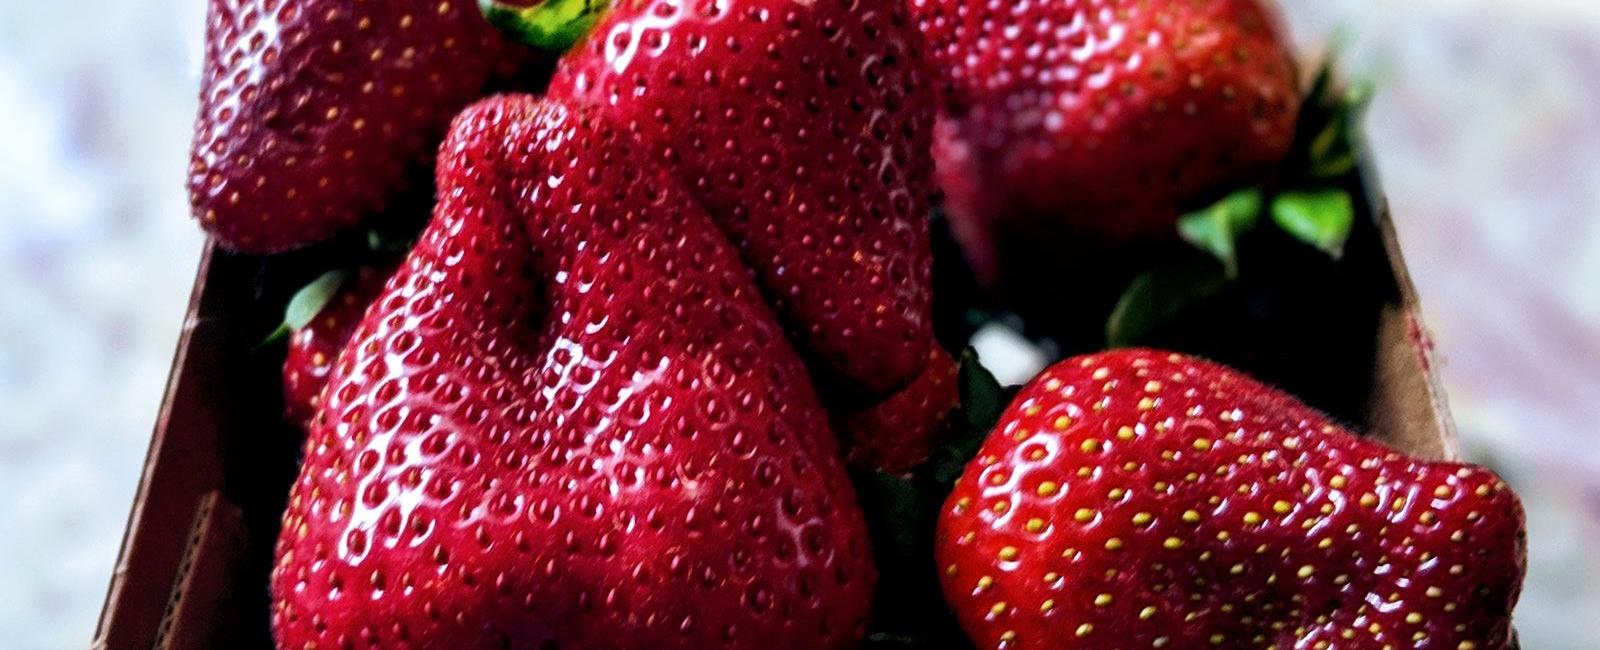 A strawberry isn t technically a berry or even a fruit